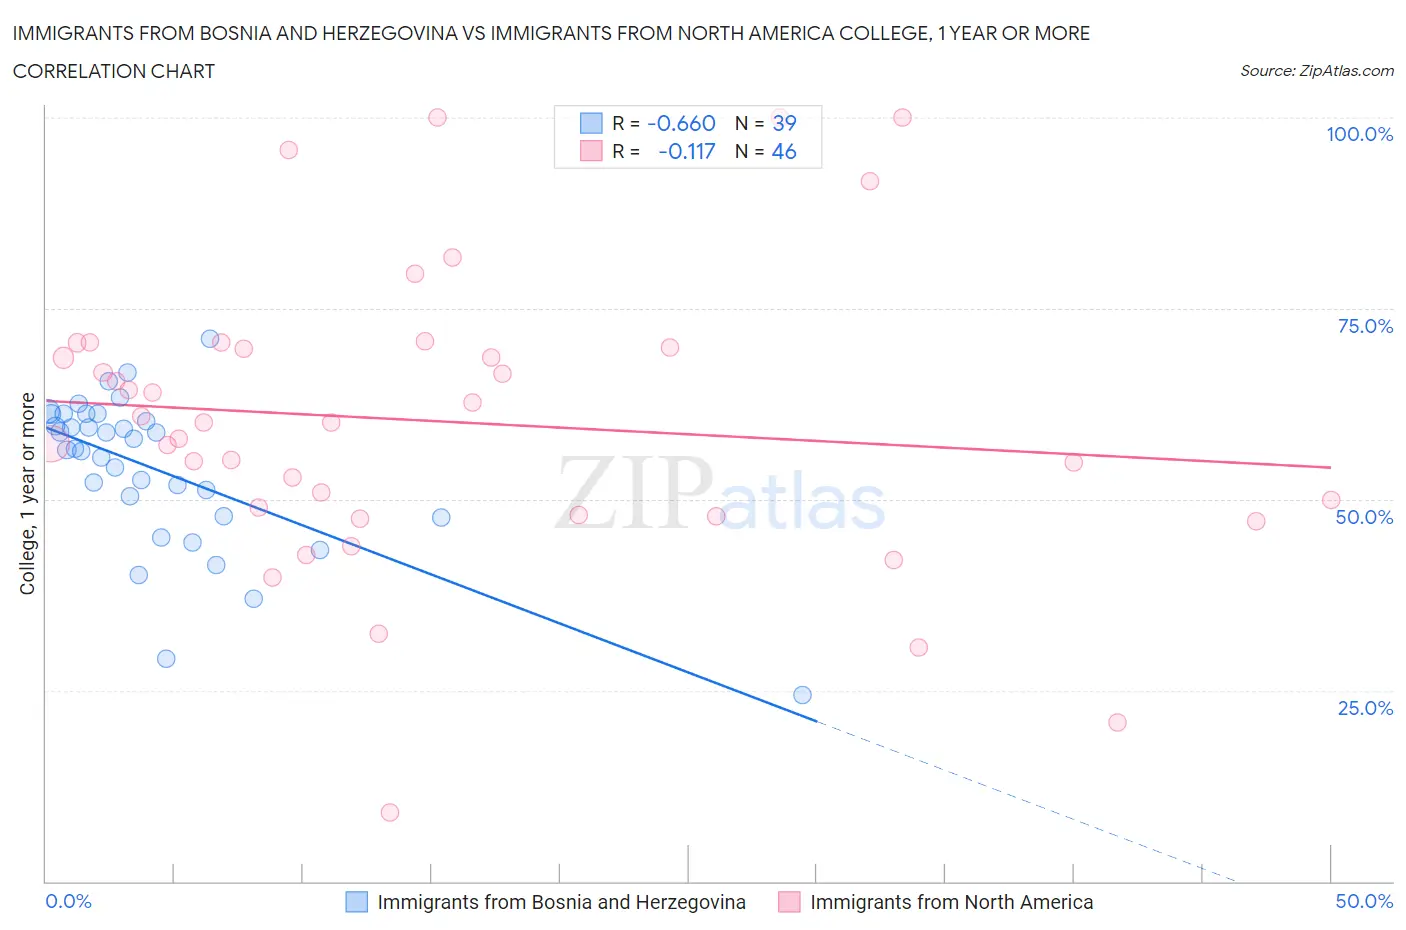 Immigrants from Bosnia and Herzegovina vs Immigrants from North America College, 1 year or more